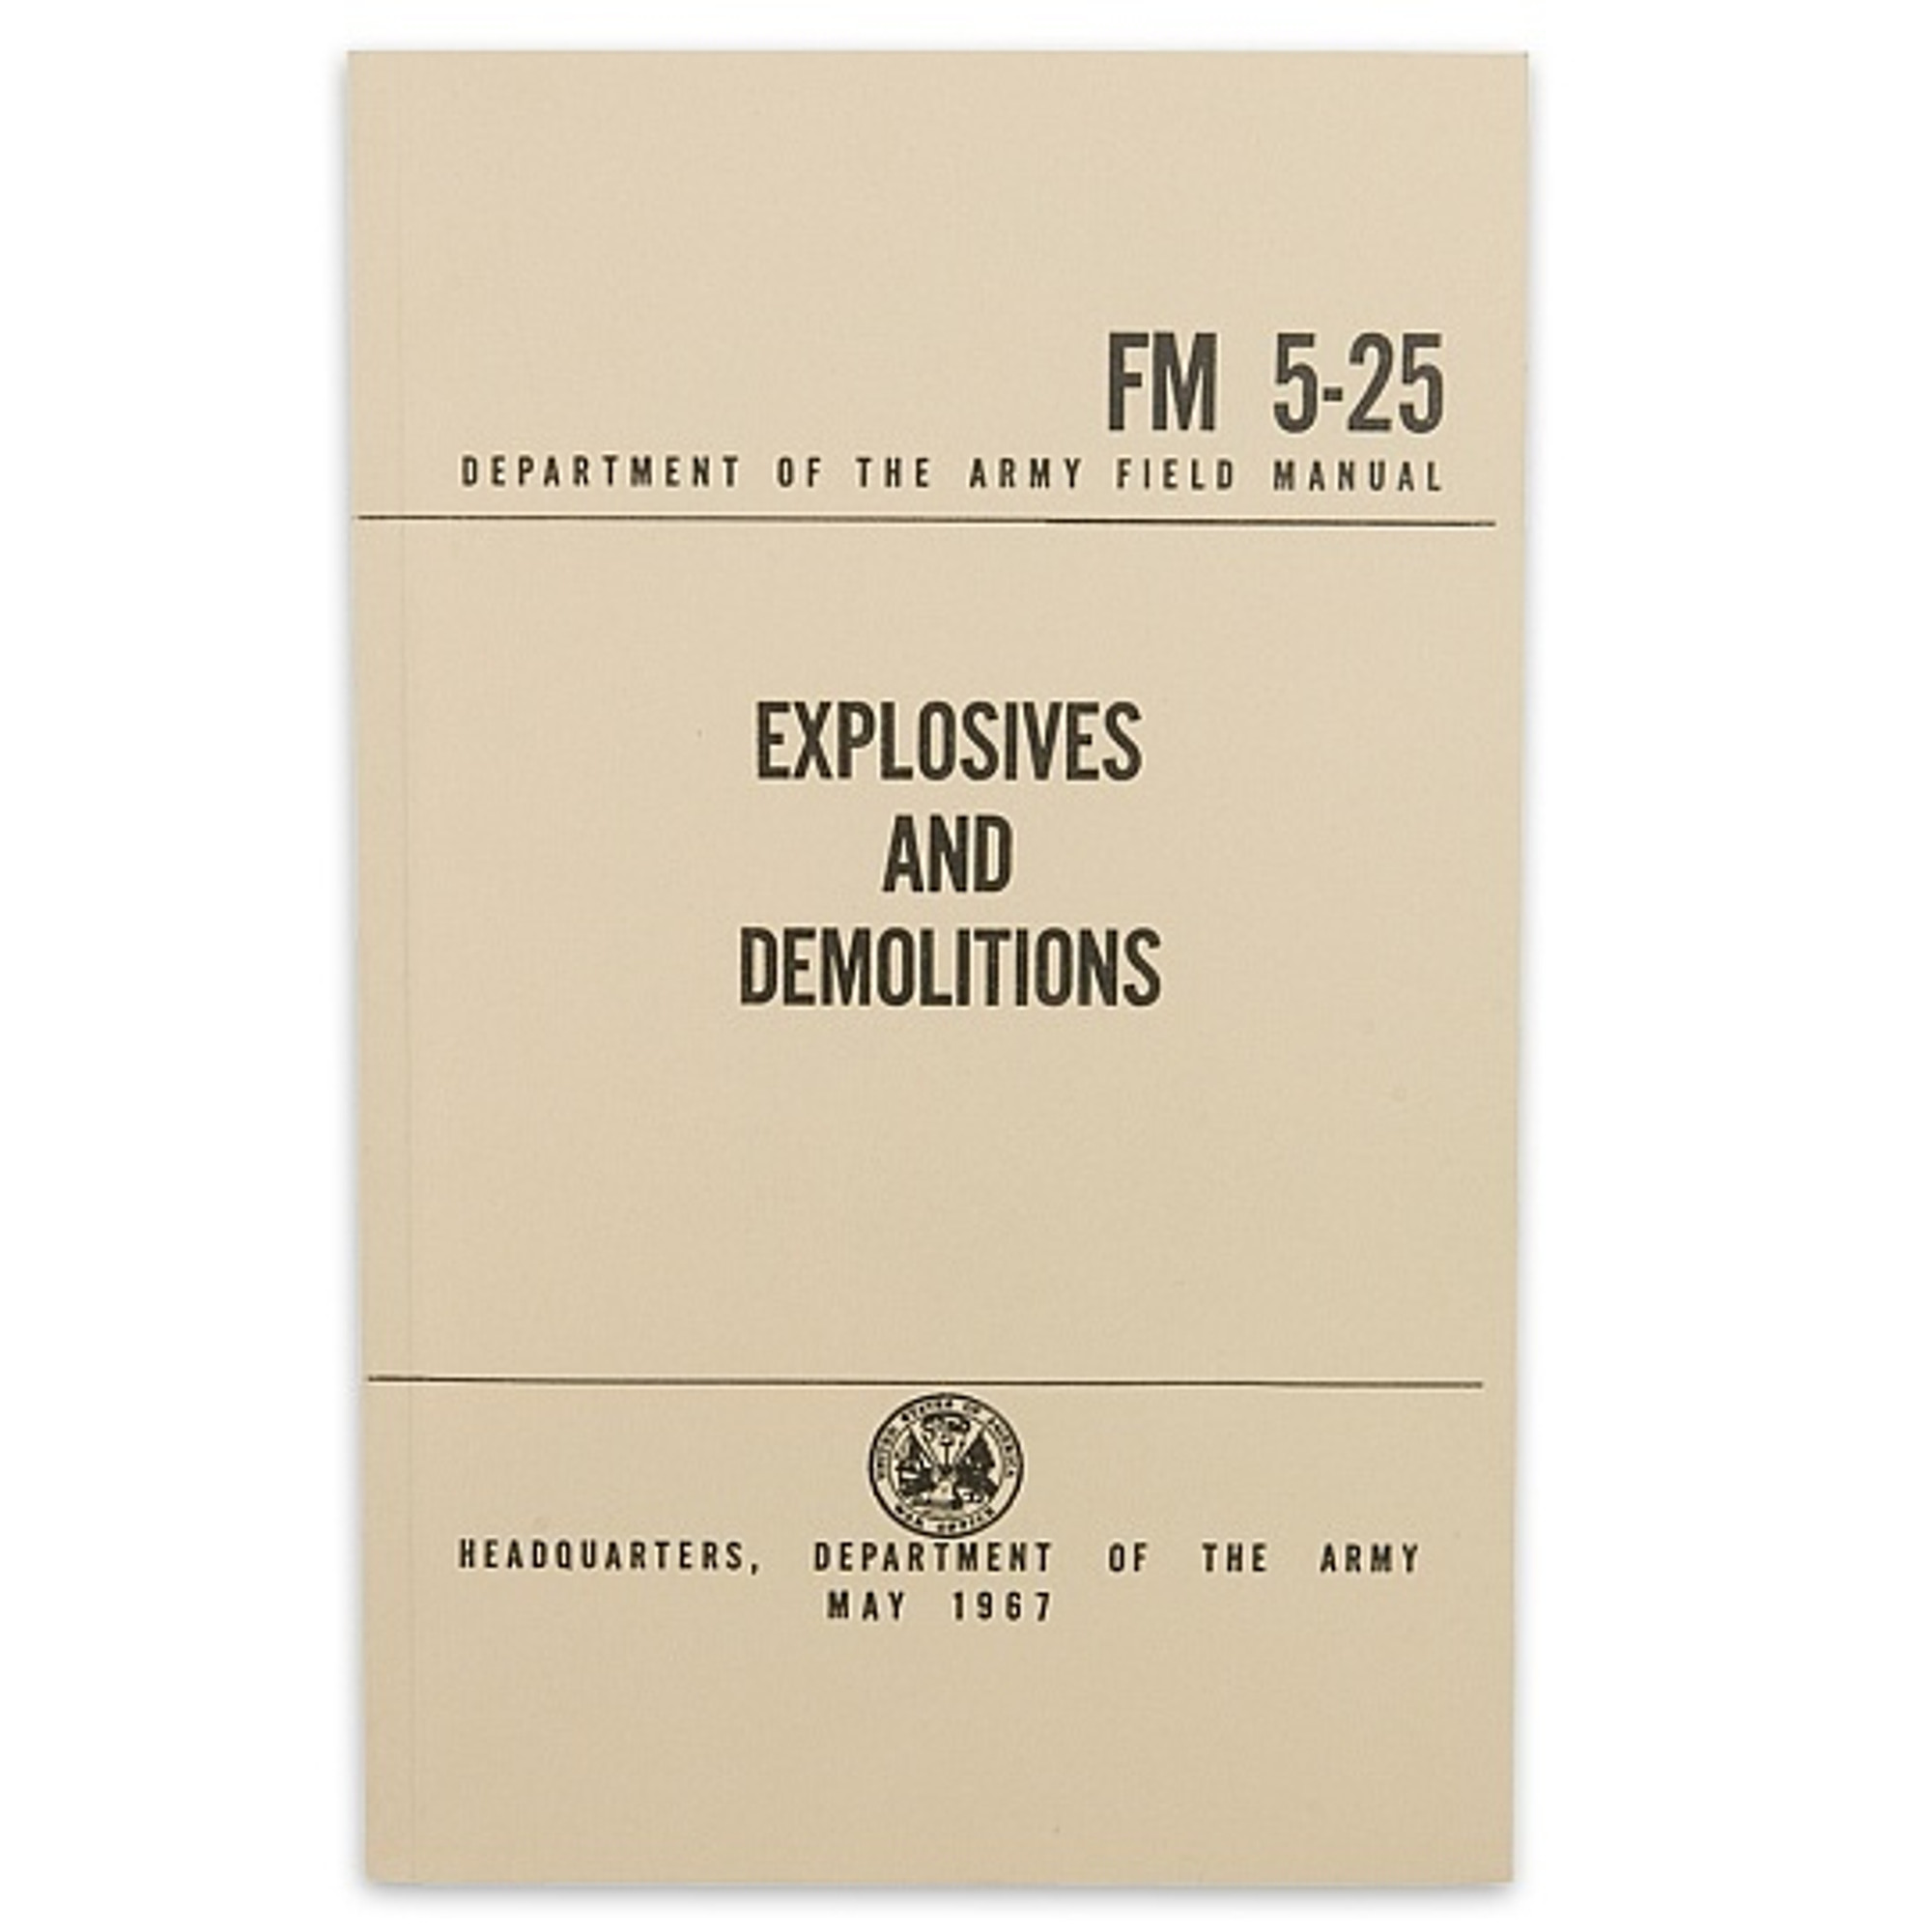 Military Manual - Explosives And Demolitions